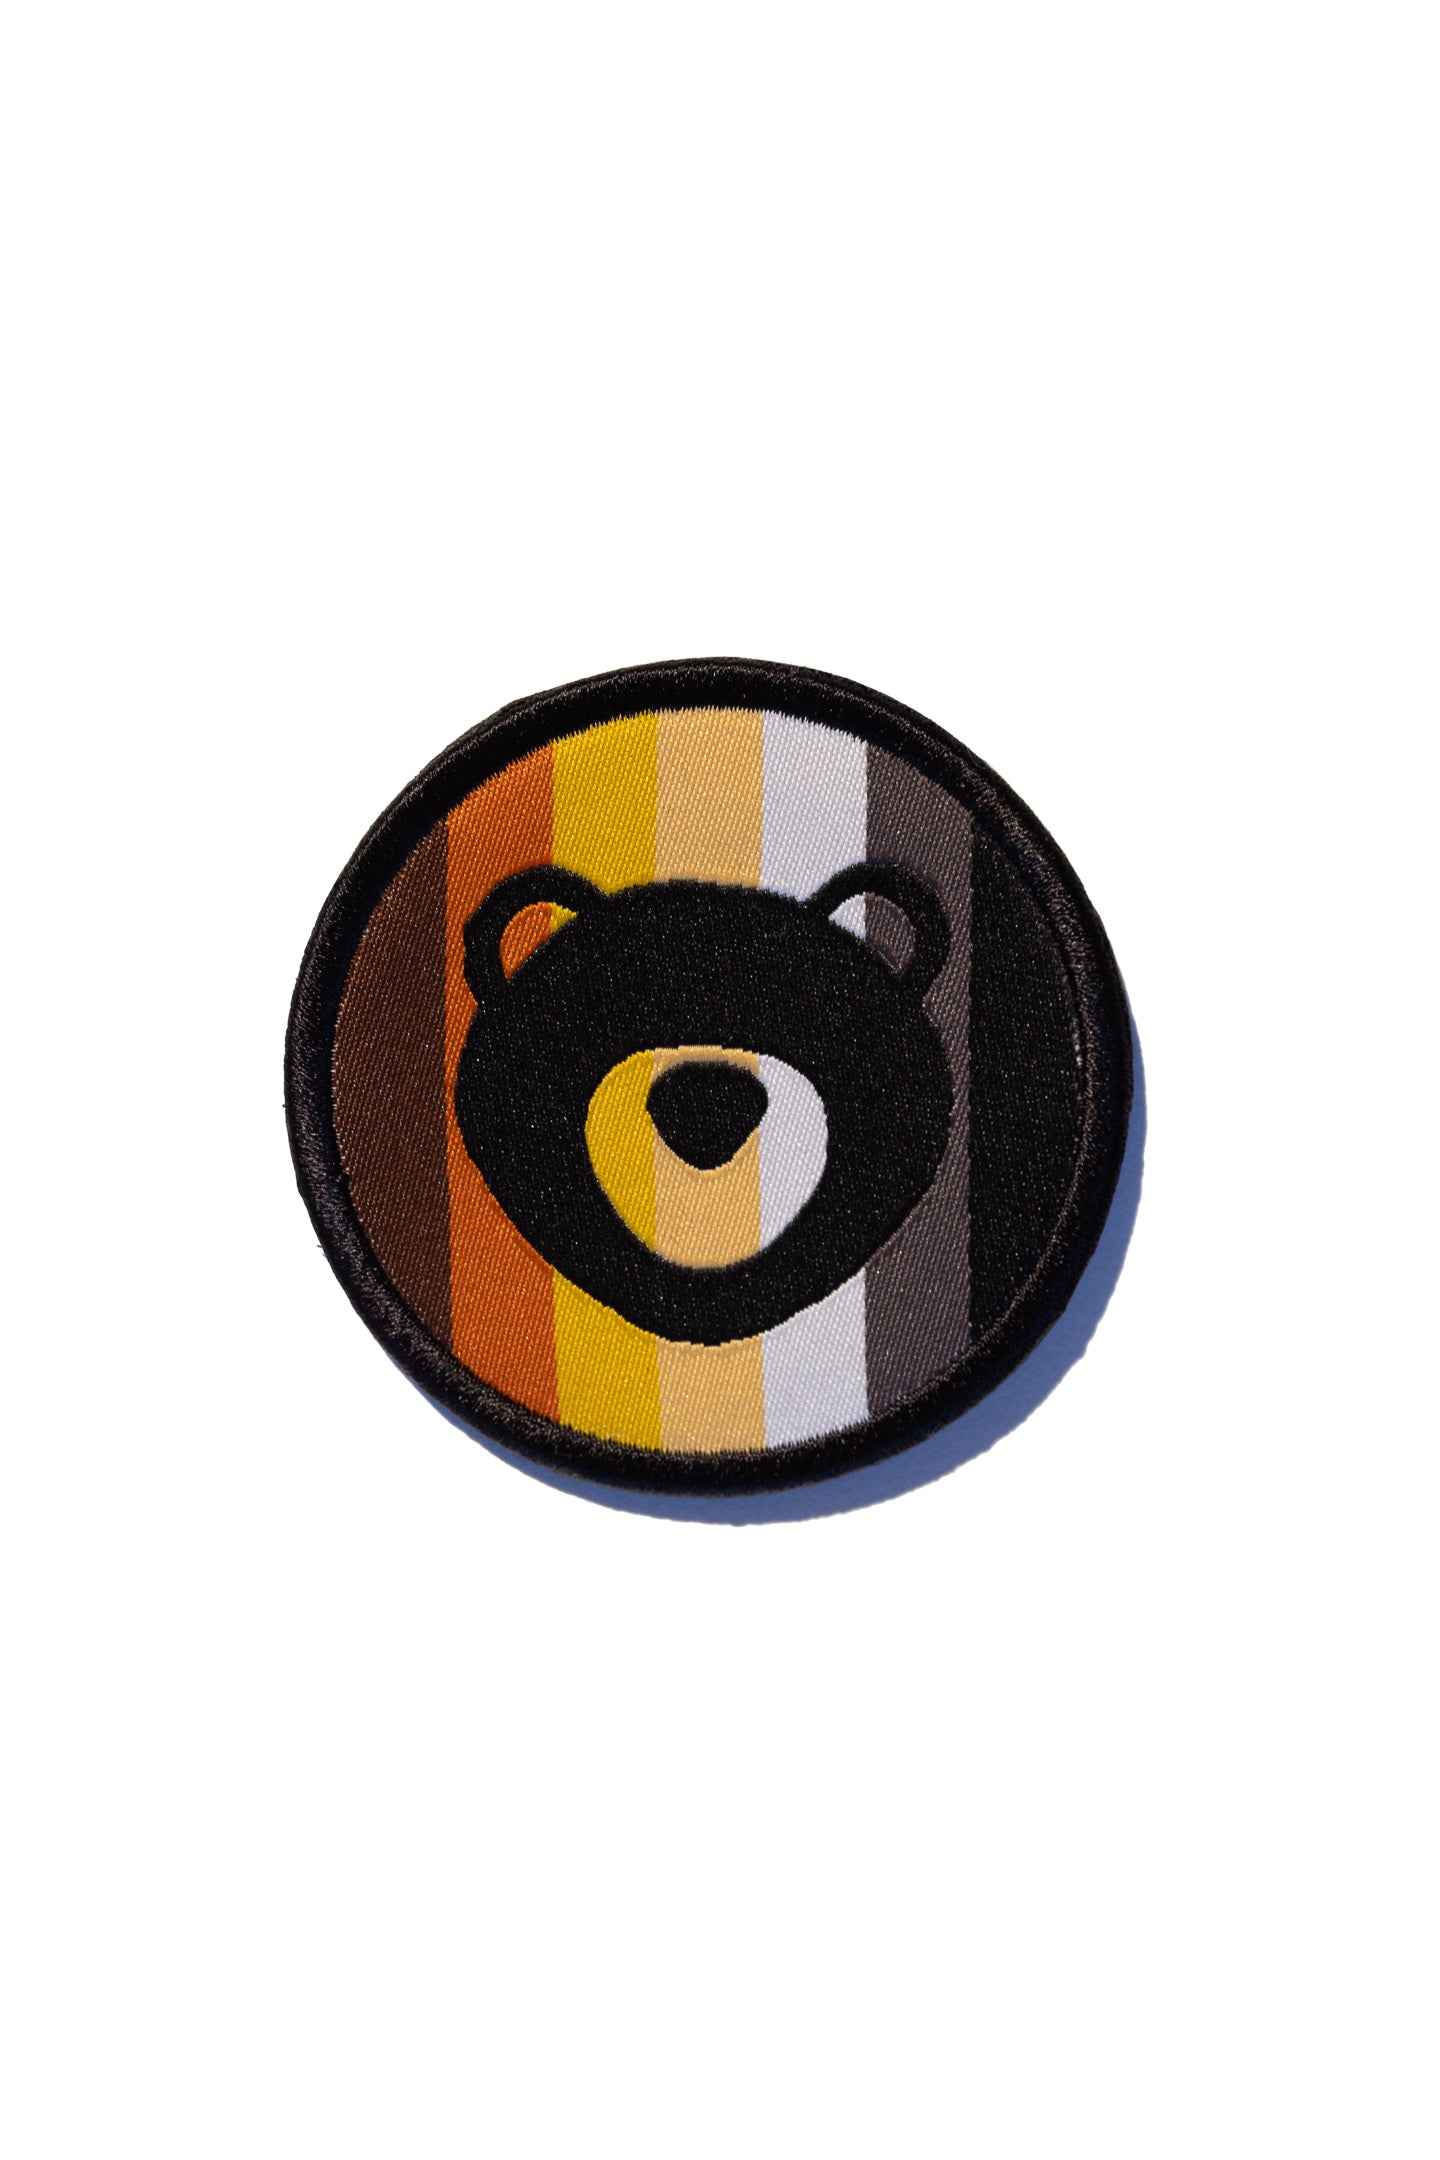 CUB ICON; SOUNDOFF X MR 2.5" WOVEN DECAL PATCH